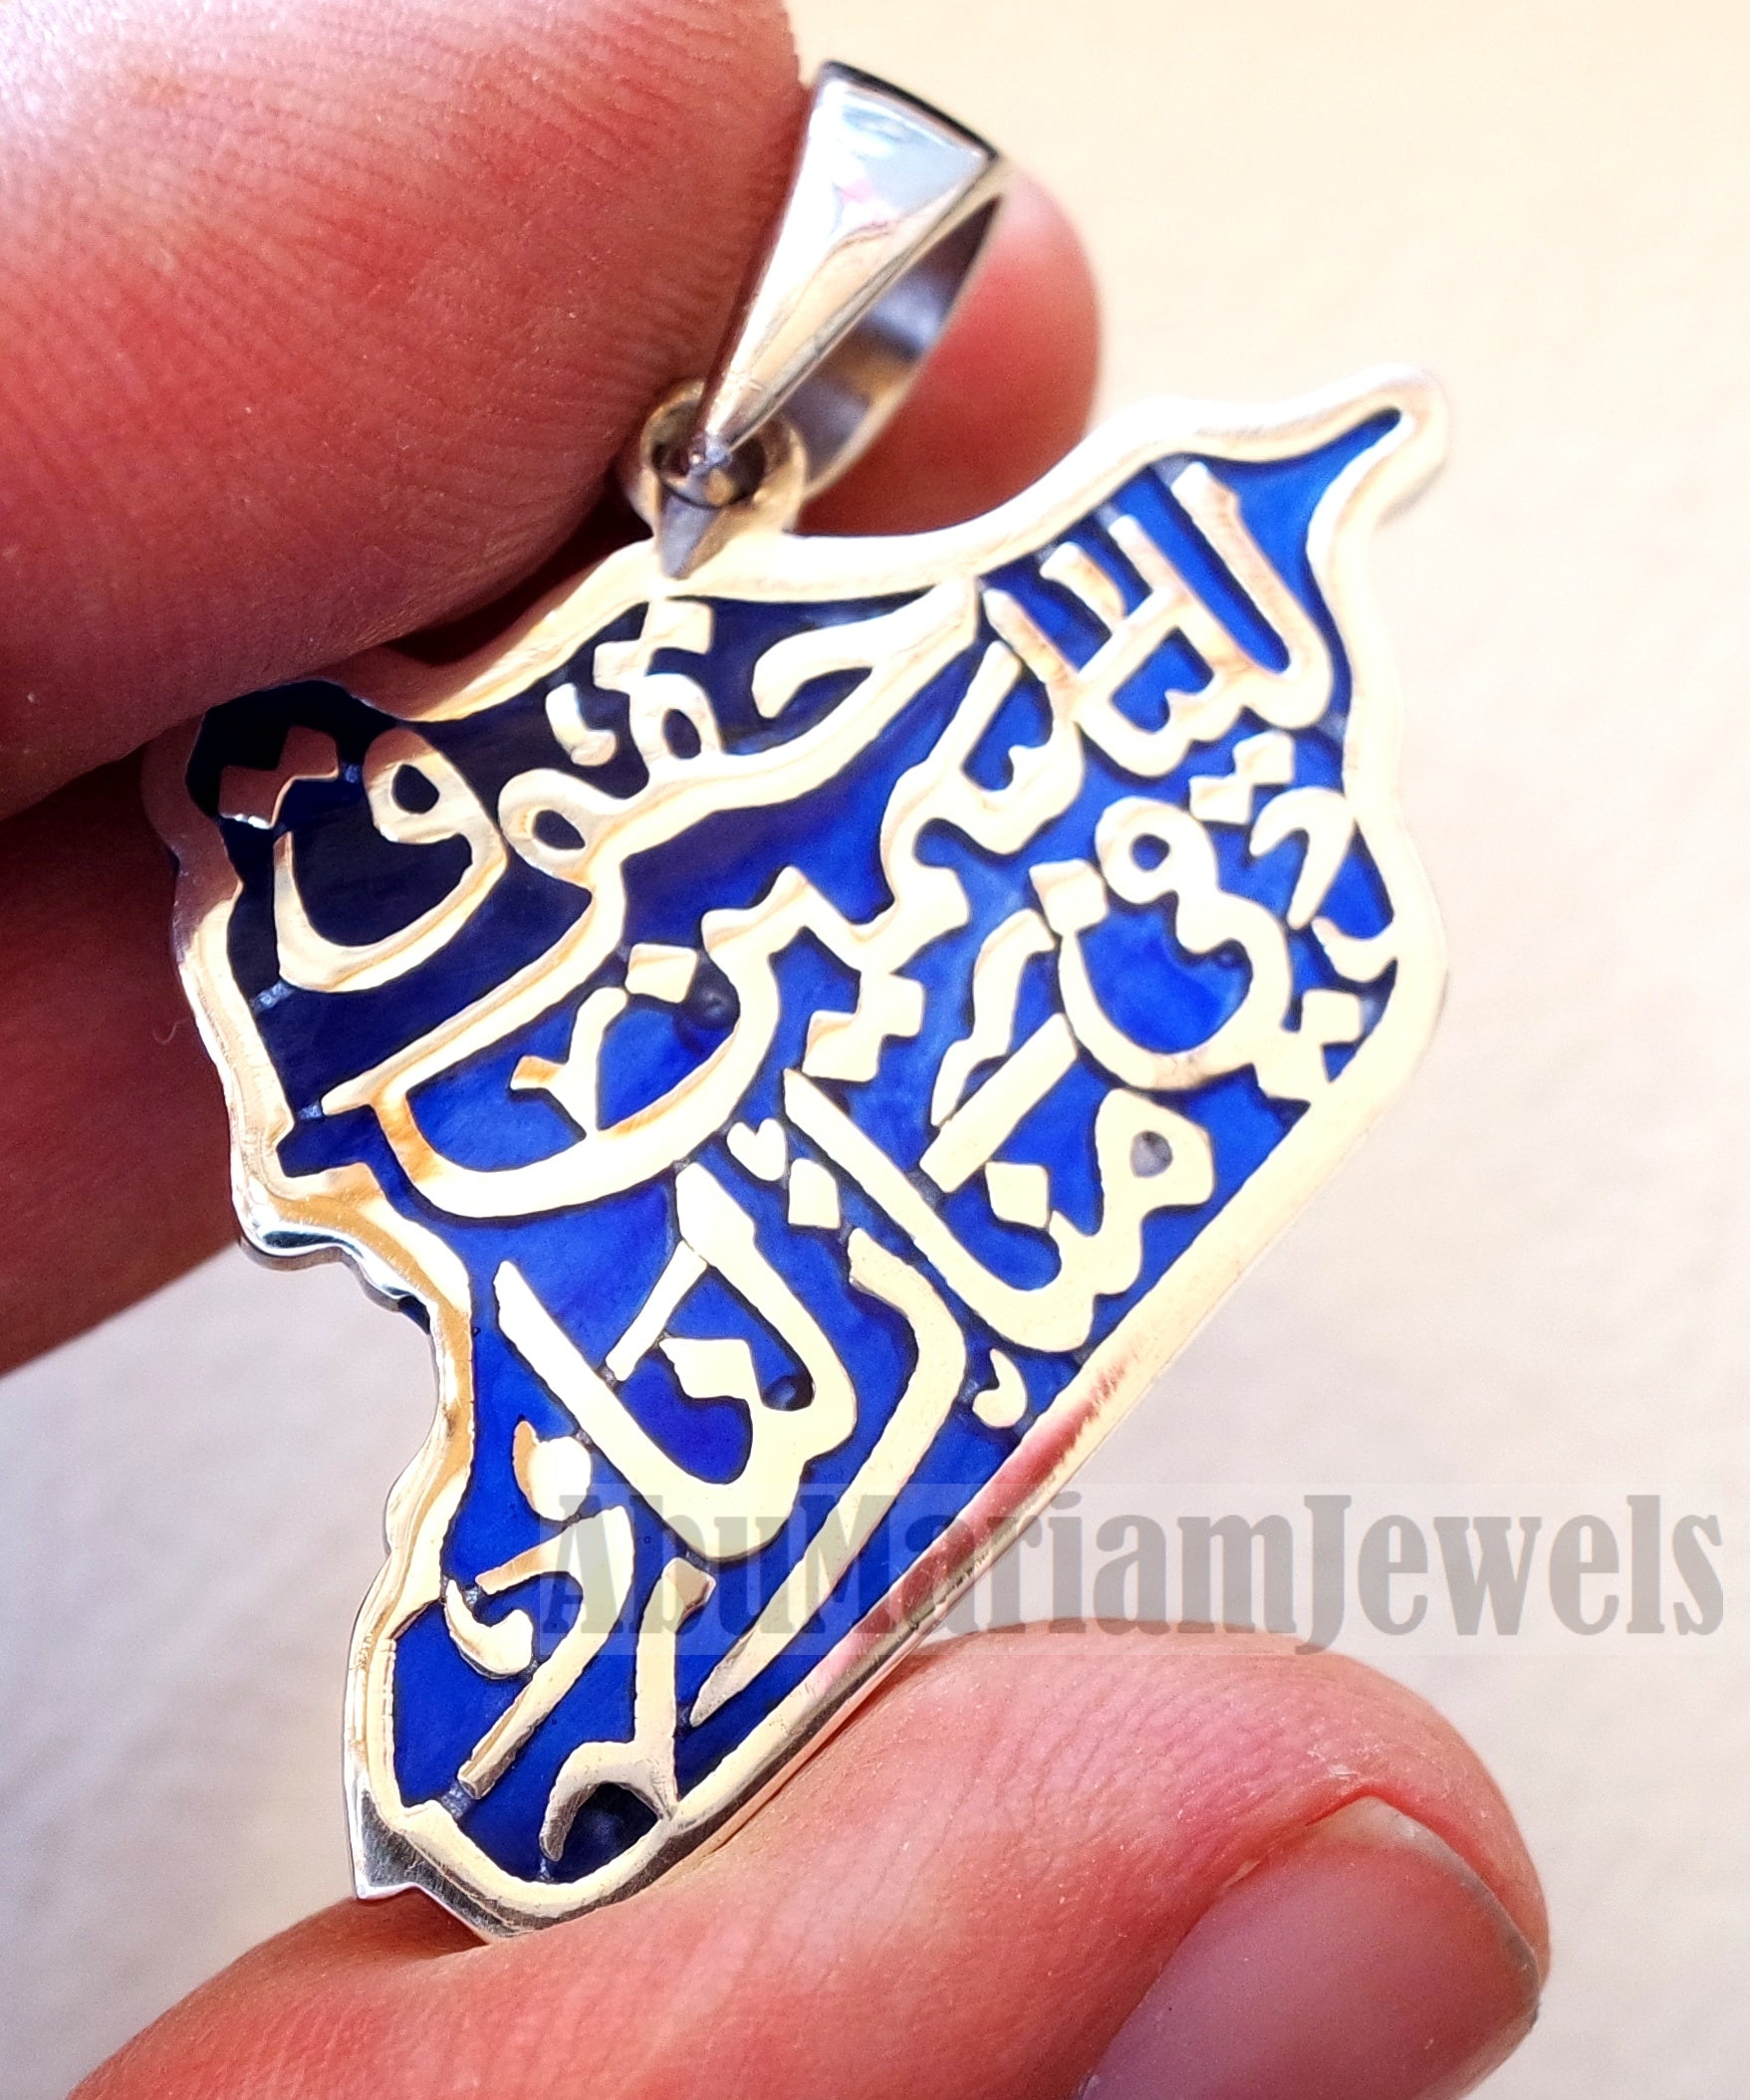 Syria map pendant with thick chain famous poem verse sterling silver 925 dark blue enamel مينا high quality jewelry arabic fast shipping خارطه سوريا